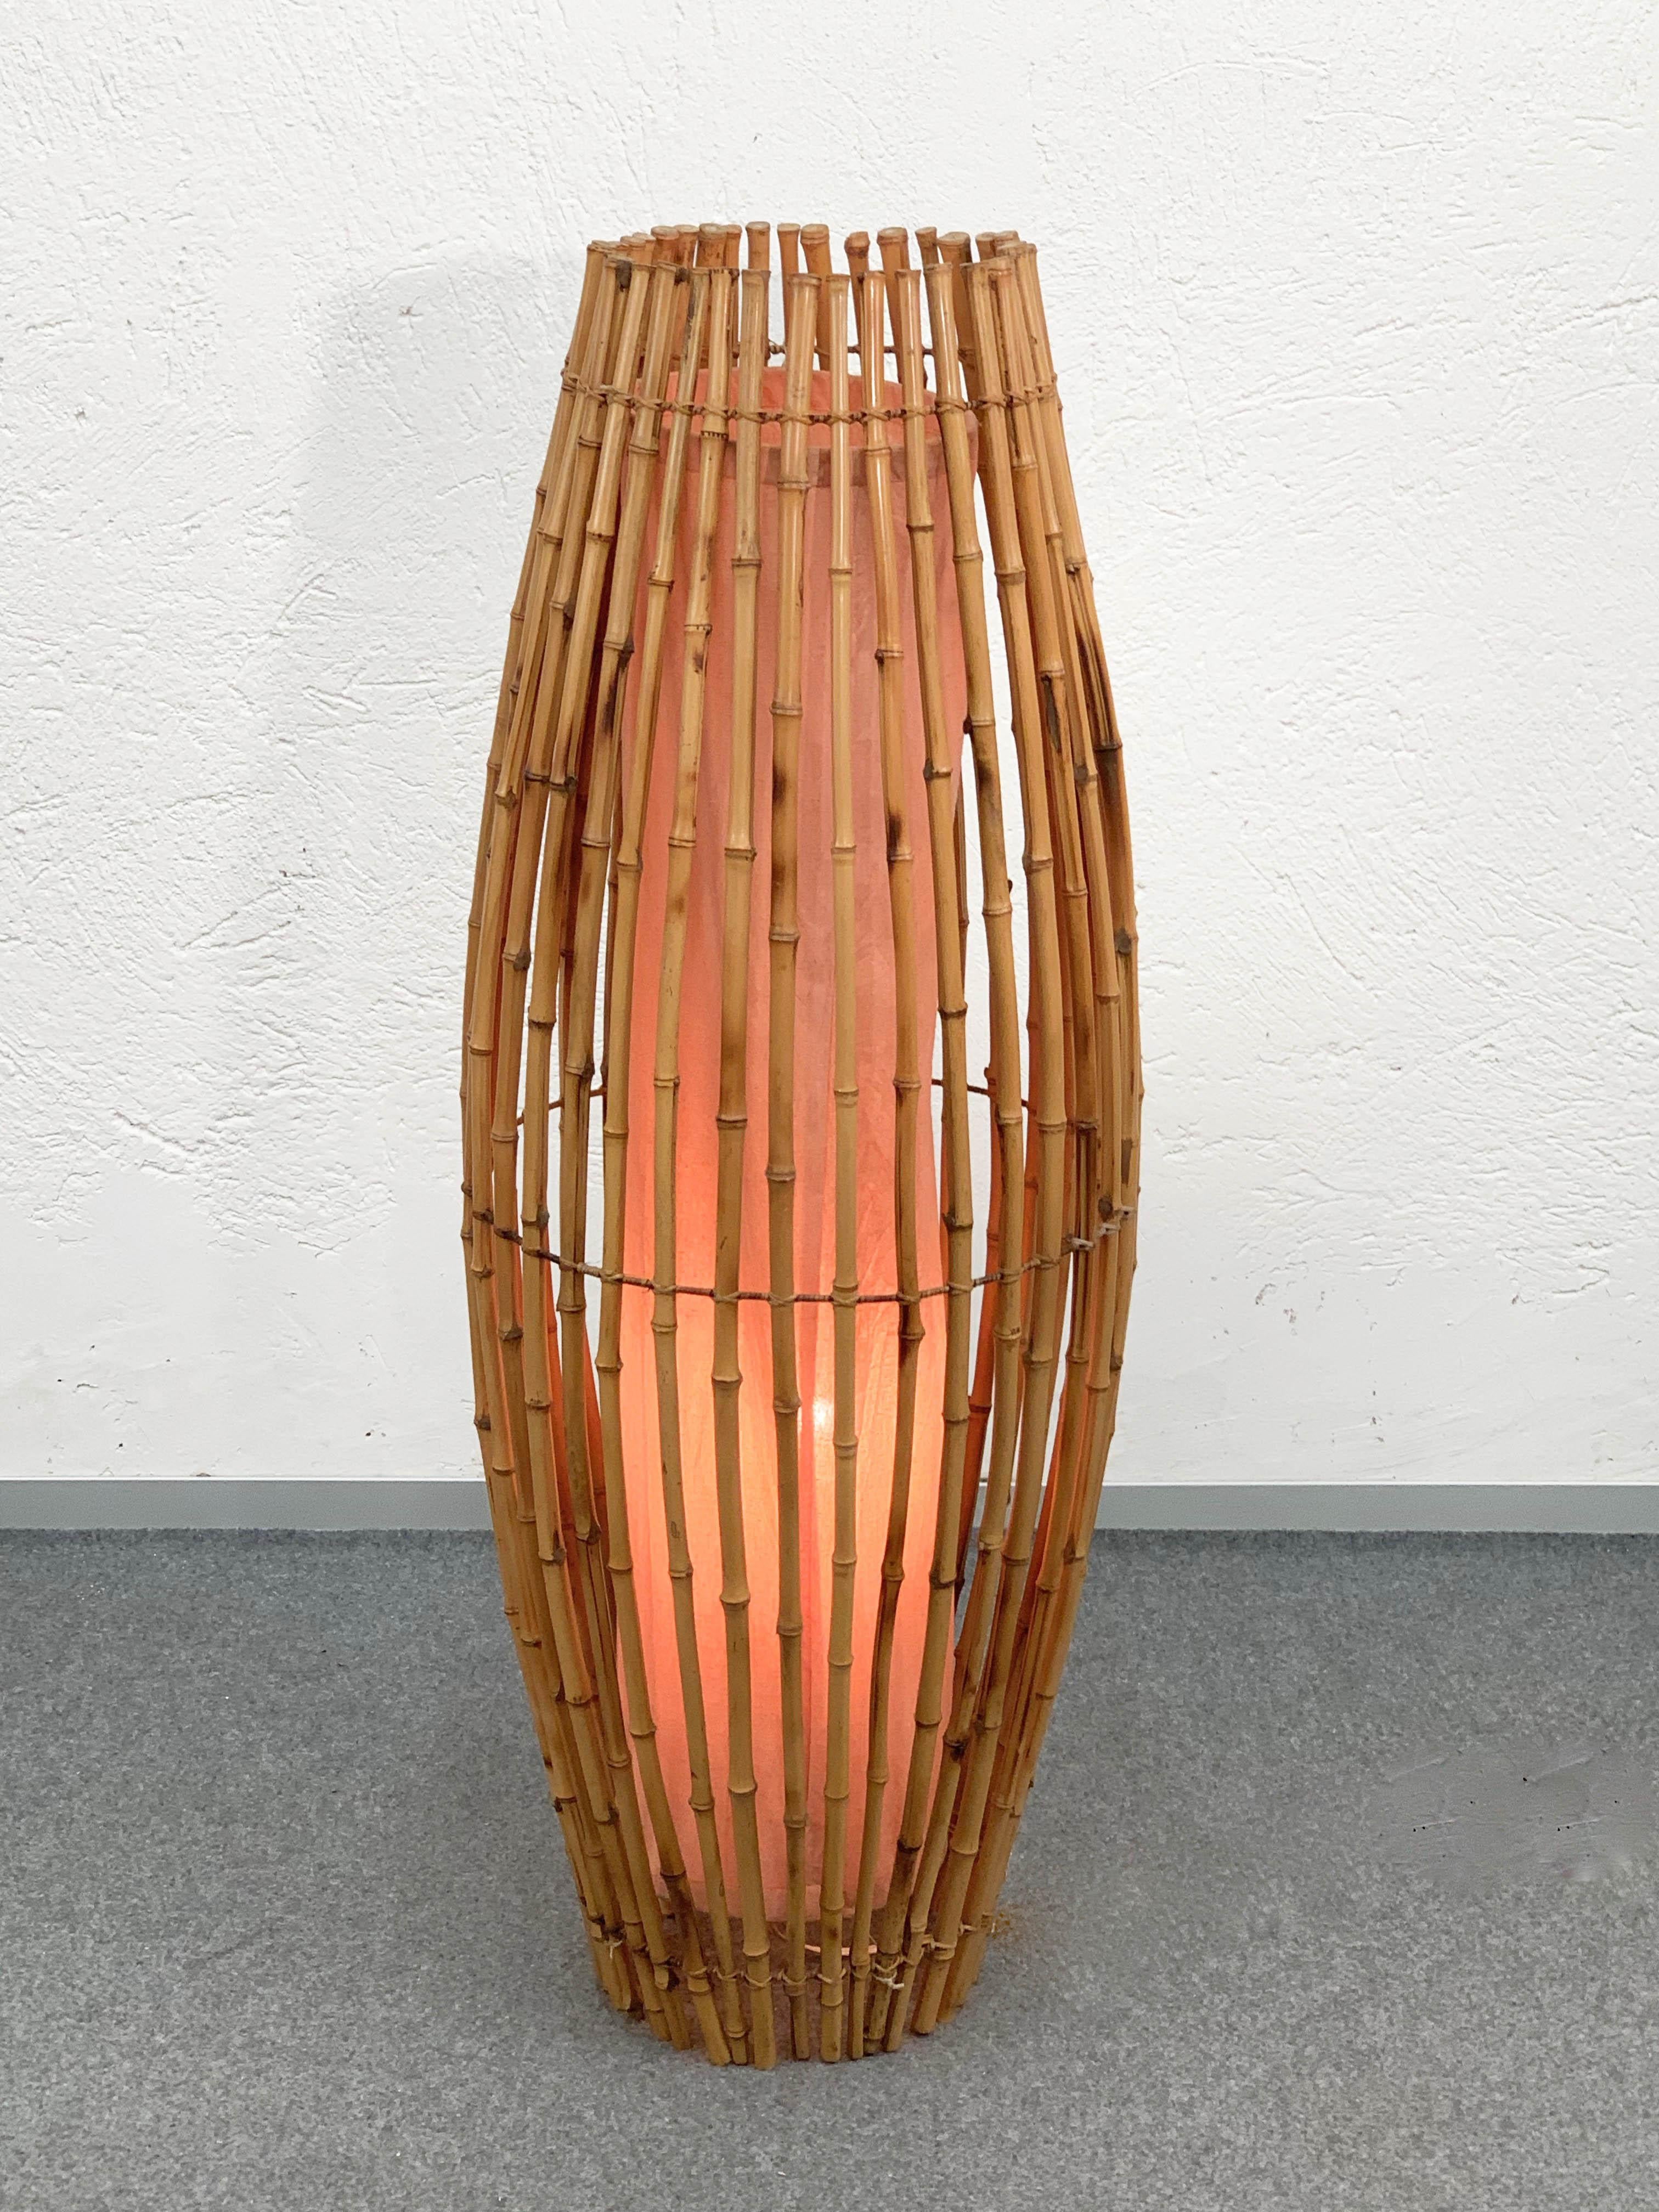 Mid-Century Modern Midcentury Italian Bamboo and Rattan Floor Lamp Attributed to Albini, 1960s For Sale